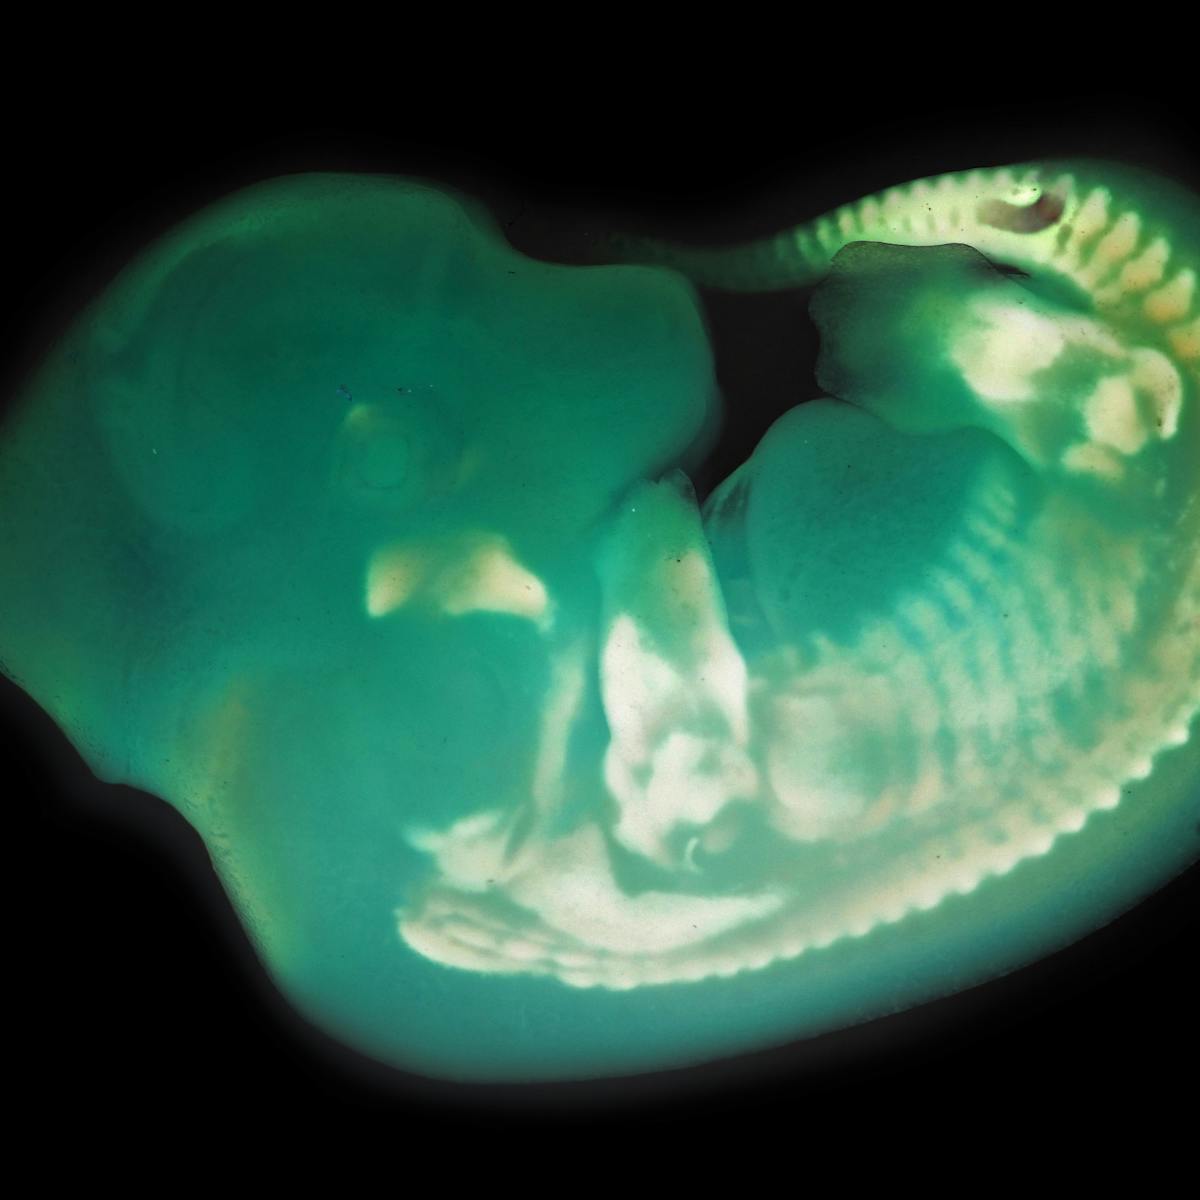 Flipping the genetic 'switch' that makes many animals look alike as embryos